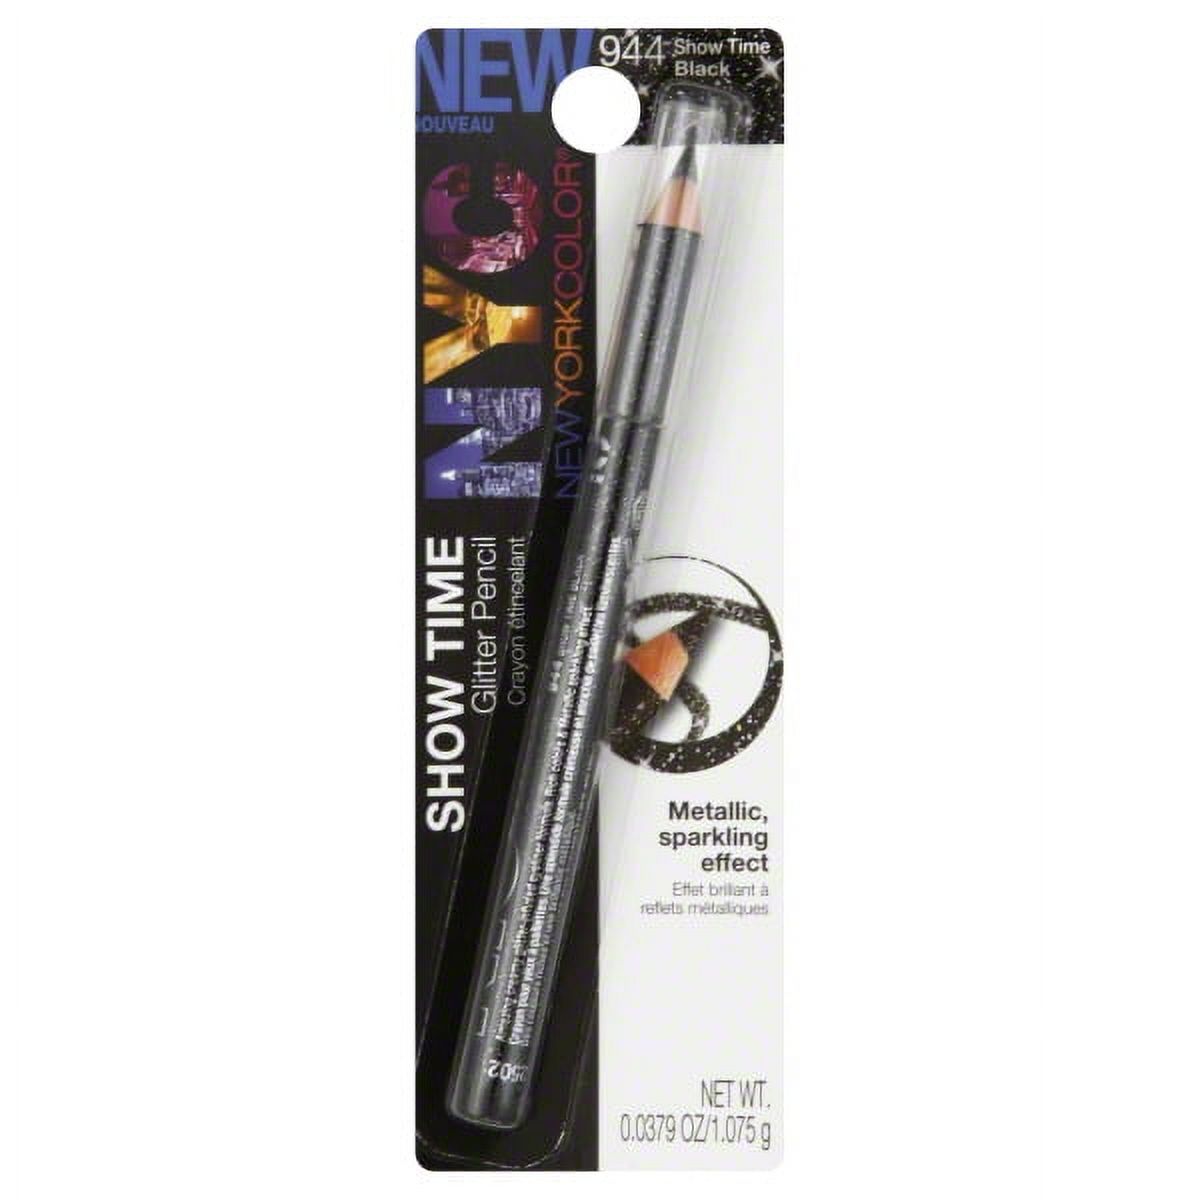 NYC New York Color Showtime Glitter Eyeliner Pencil, 944 Showtime Black - image 1 of 2